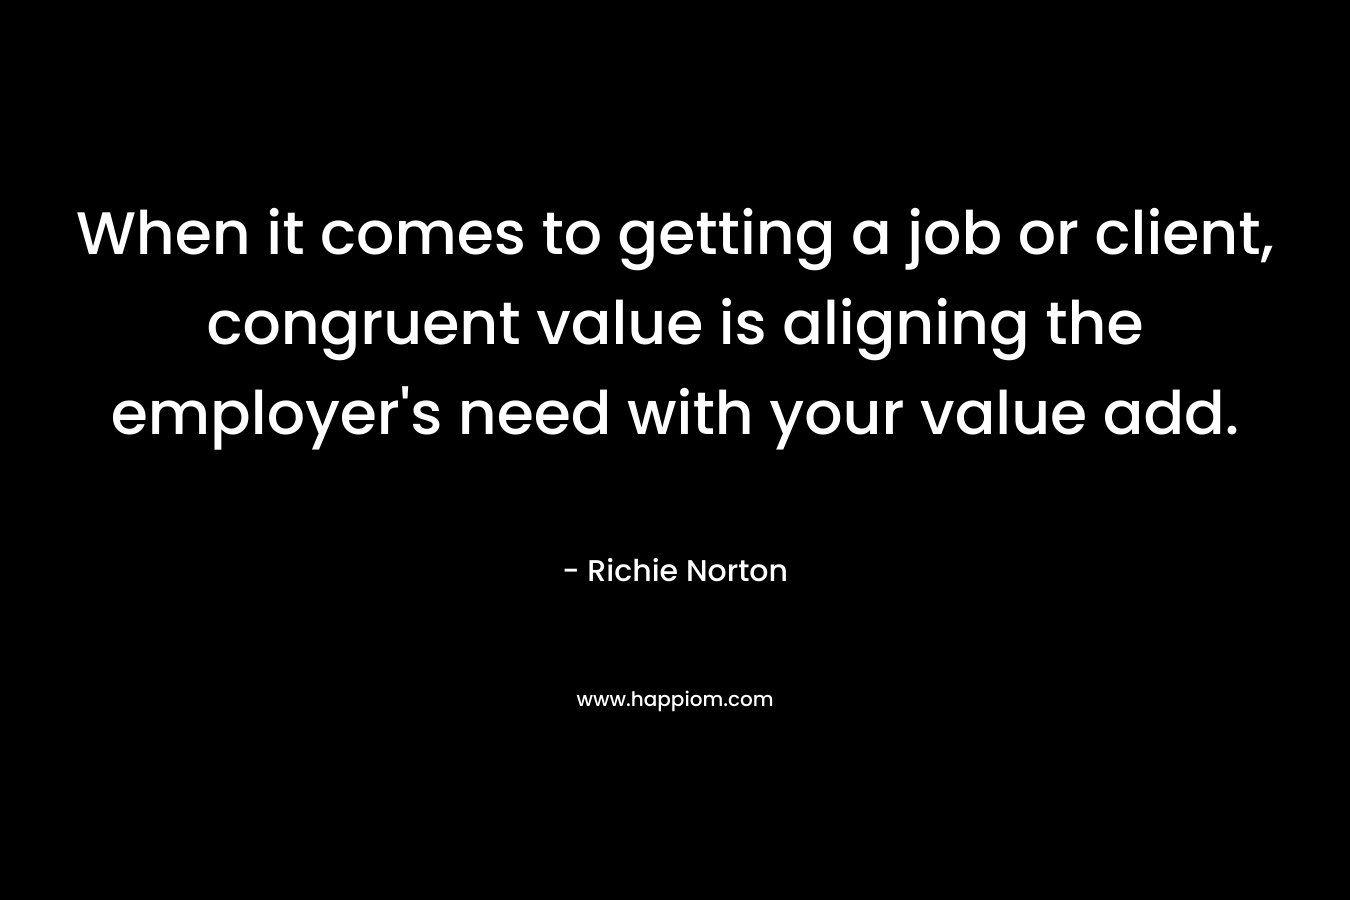 When it comes to getting a job or client, congruent value is aligning the employer’s need with your value add. – Richie Norton